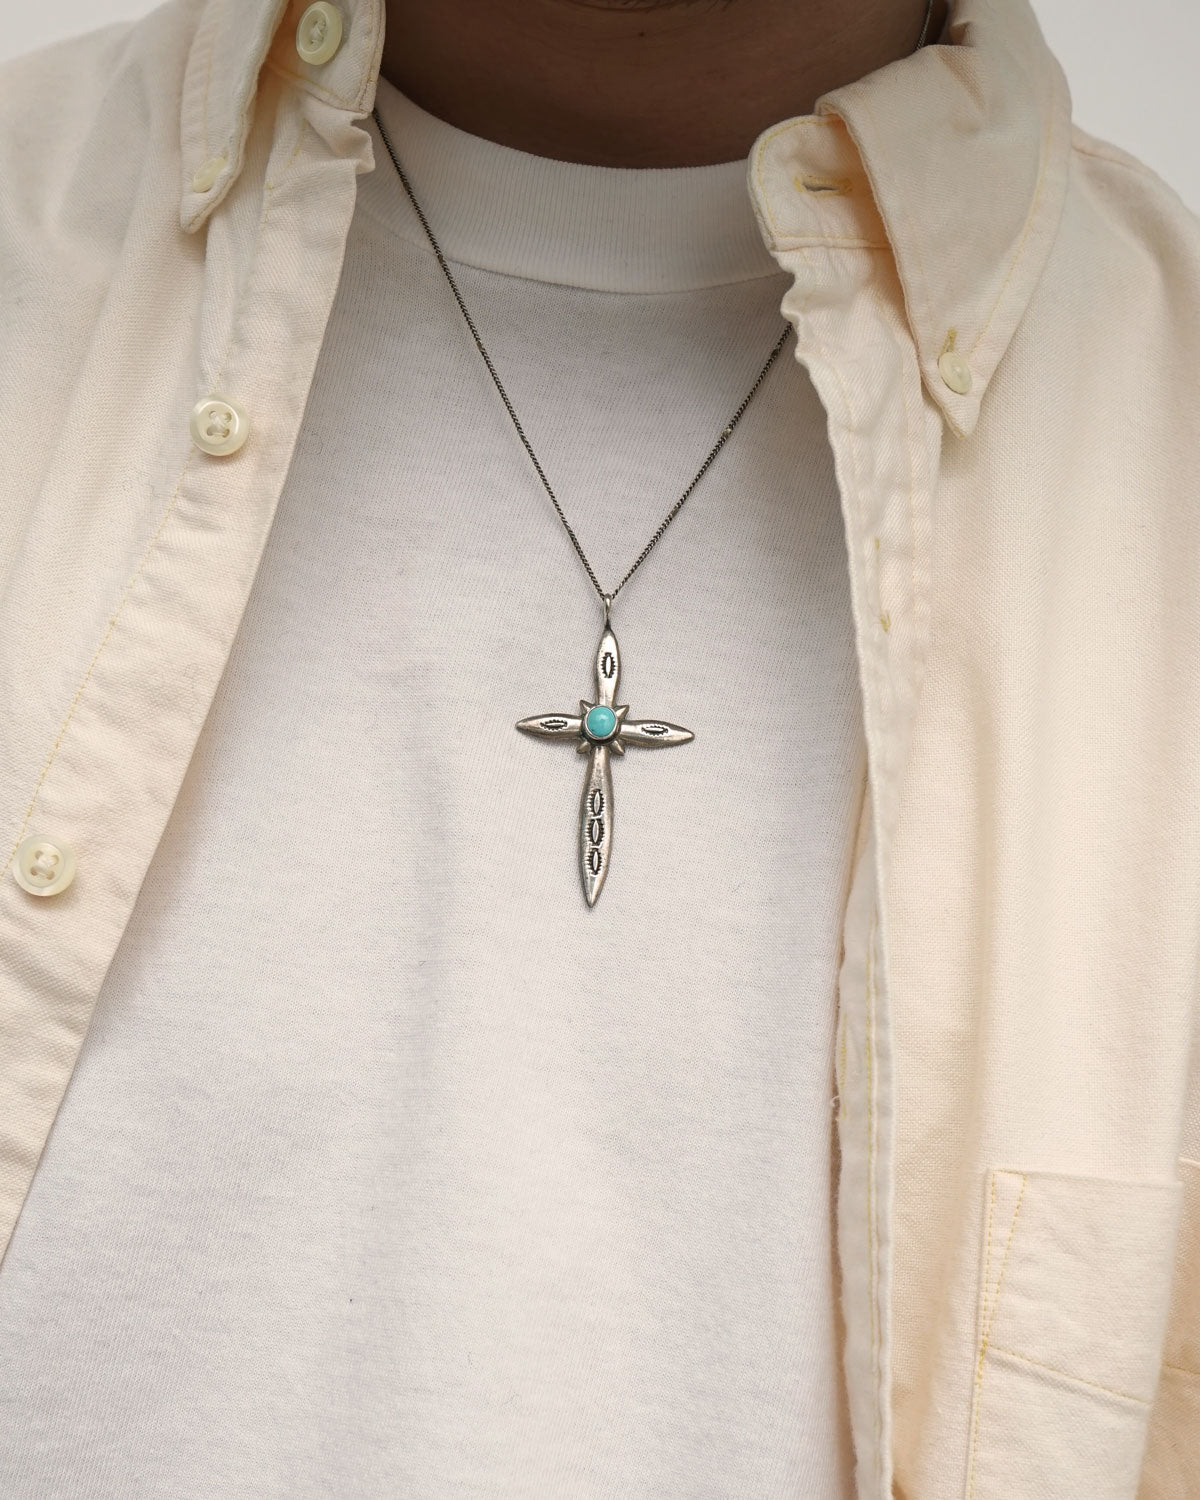 Silver Chain Necklace w/ Turquoise Cross Charm